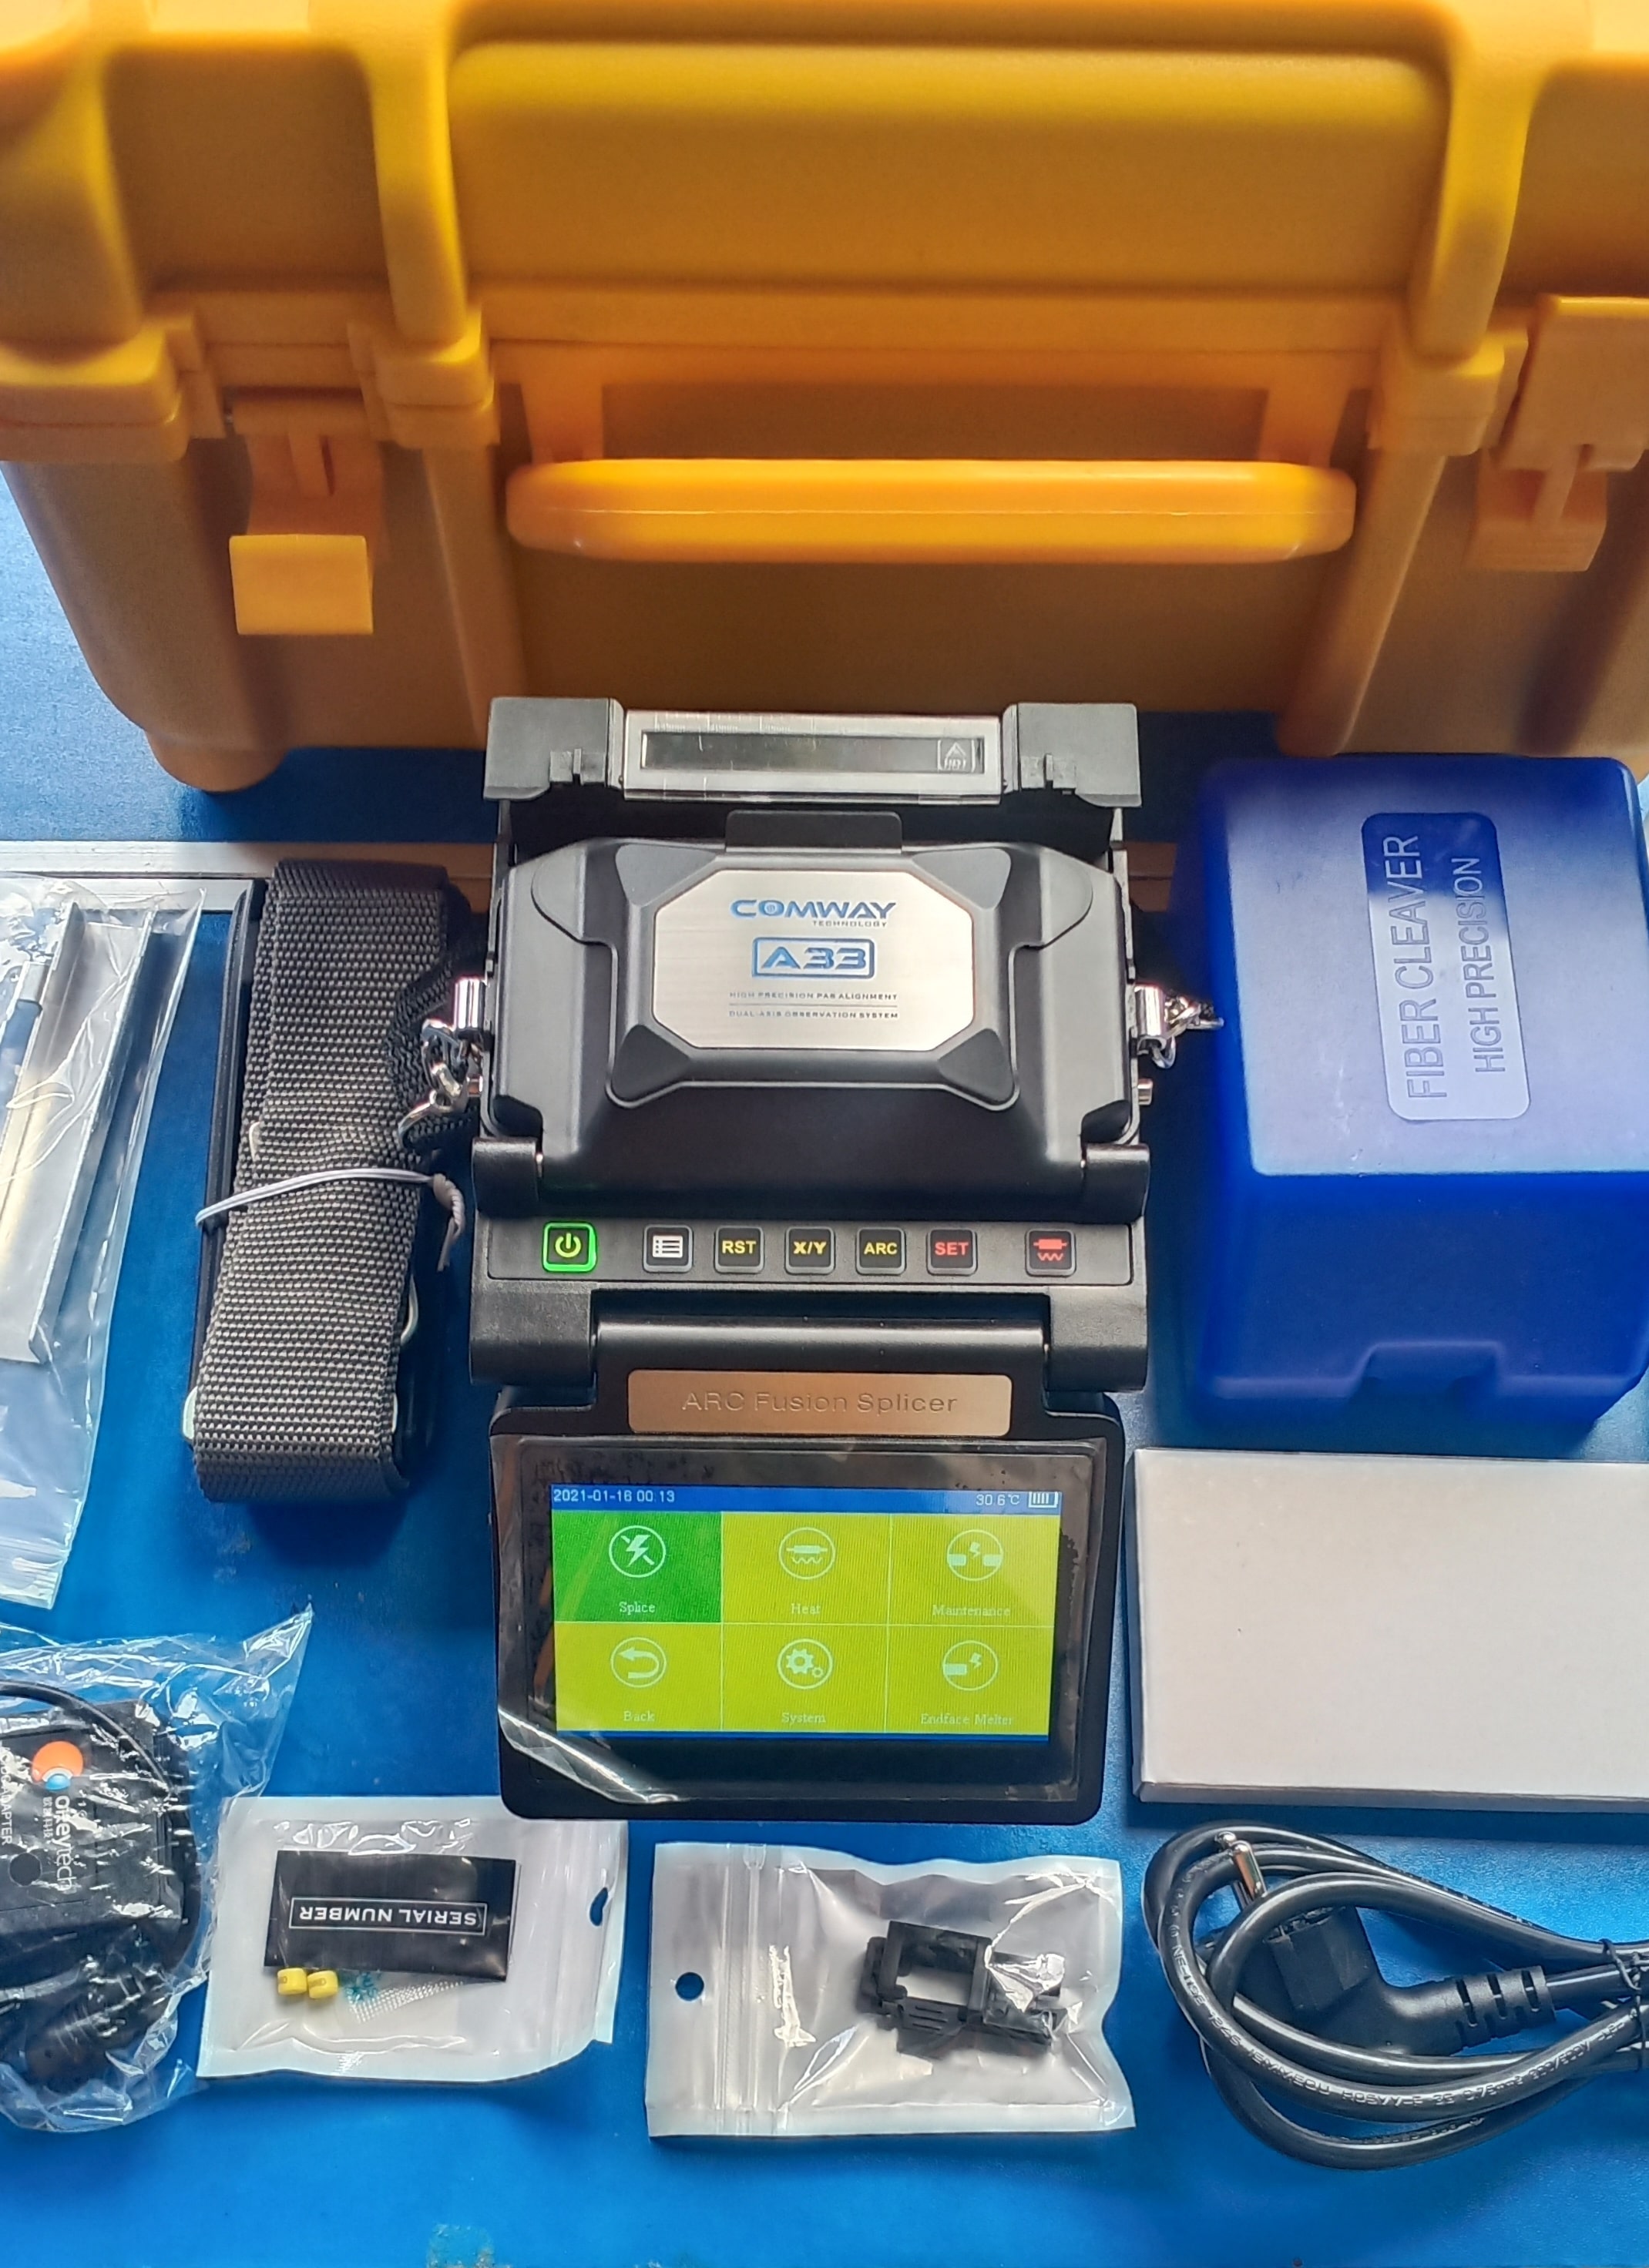 Splicer comway A33